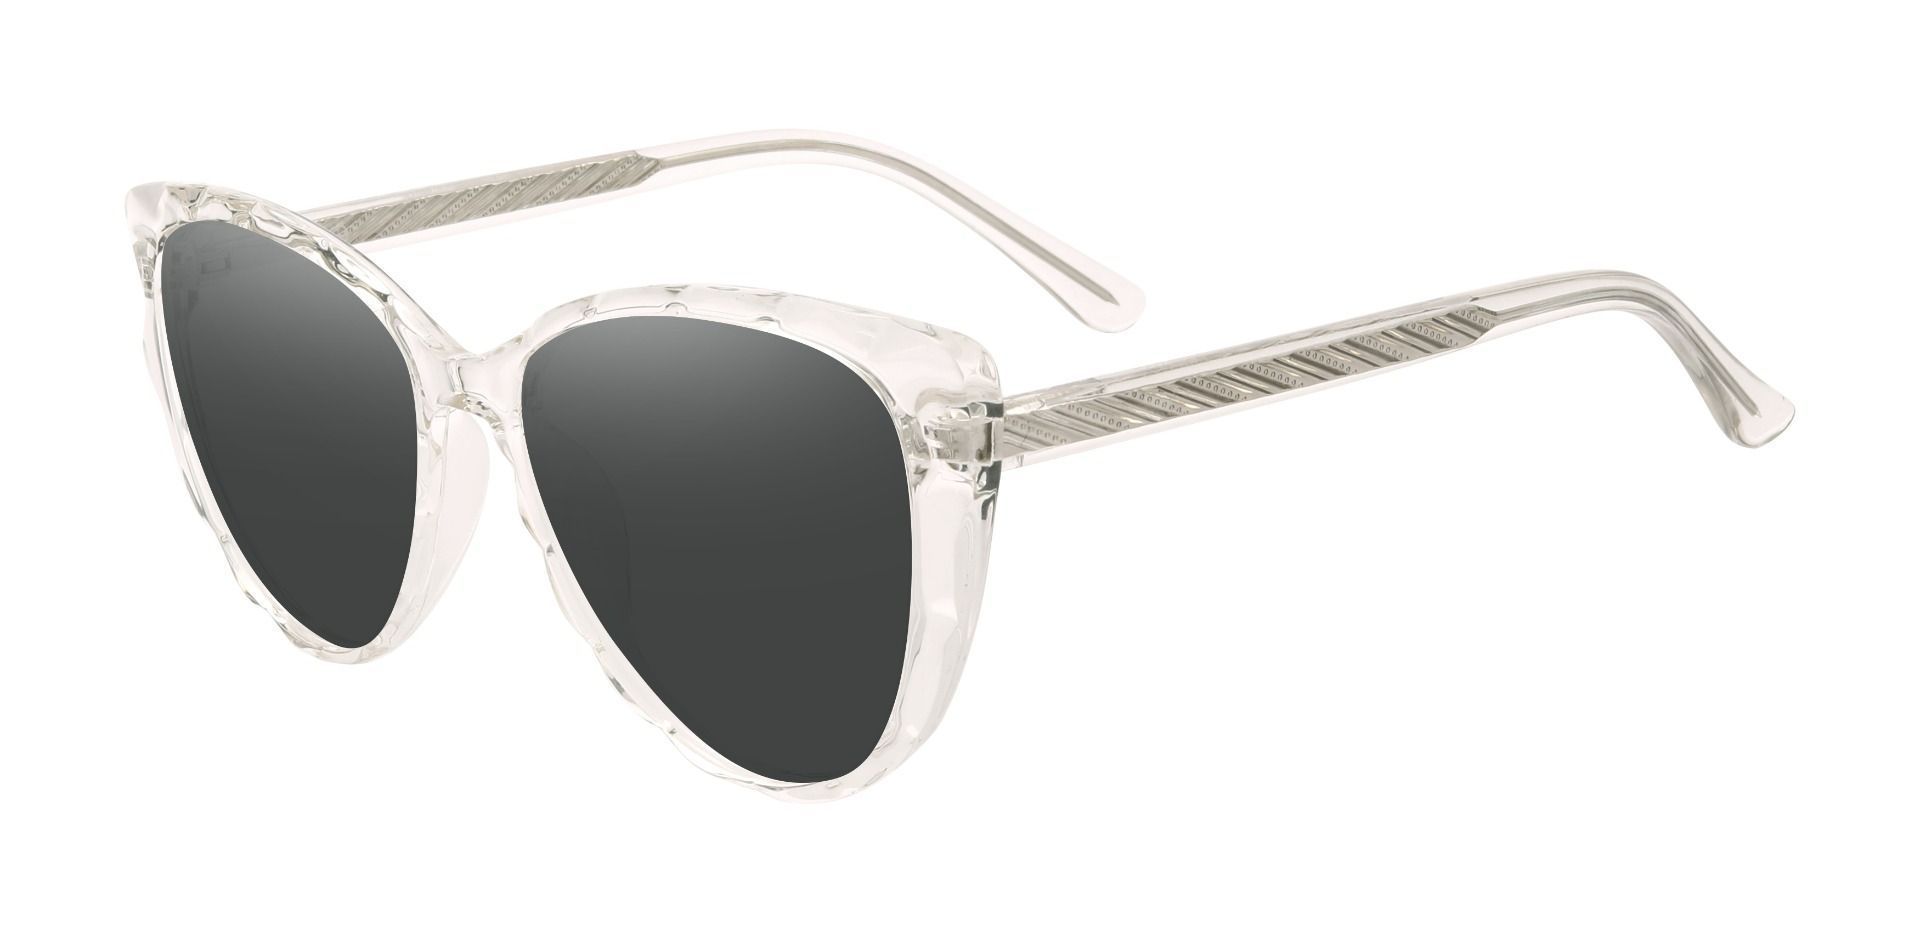 Fontaine Cat Eye Prescription Sunglasses - Clear Frame With Gray Lenses